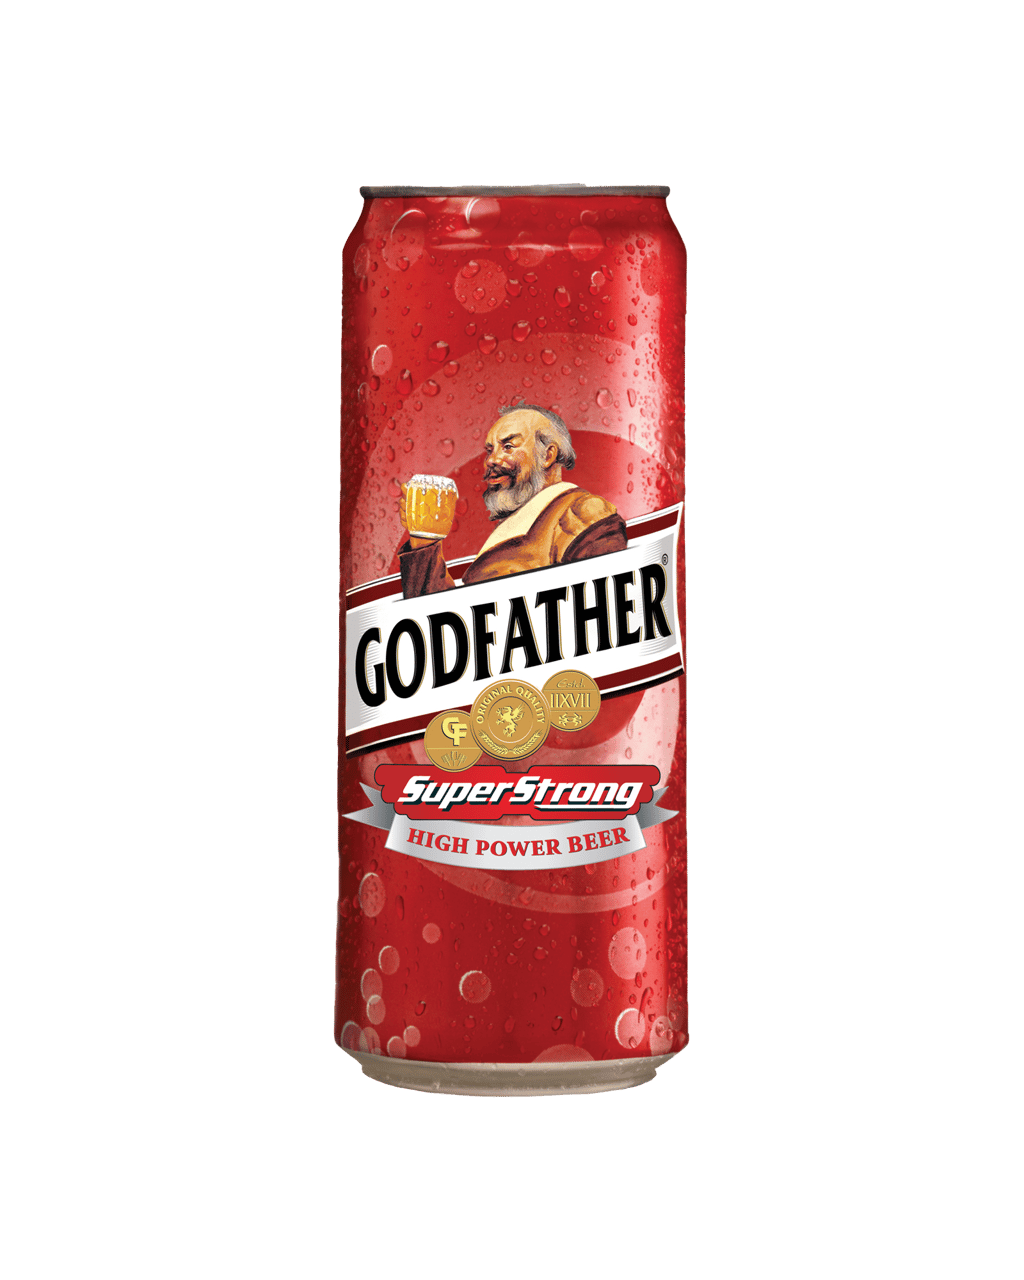 Godfather Super Strong Cans